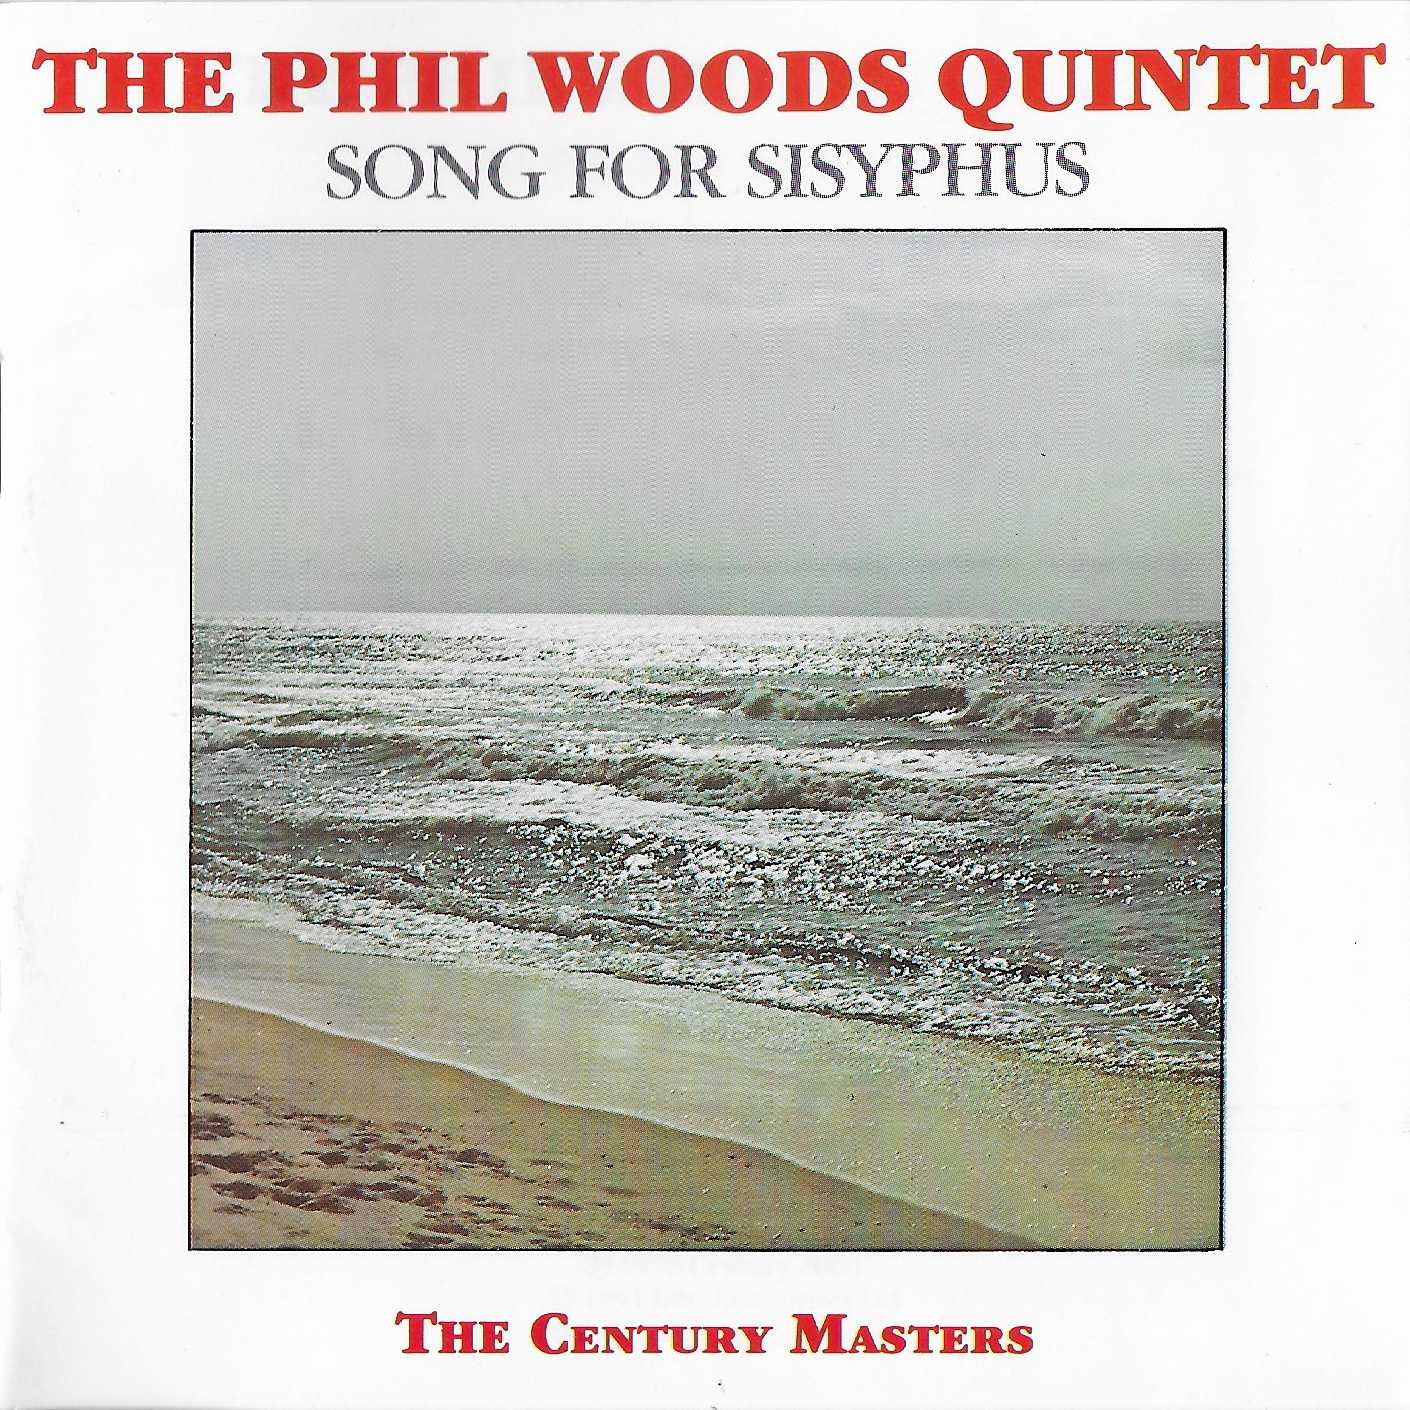 Picture of CJCD 831 The Century Catalogue - Song for Sisyphus by artist The Phil Woods Quintet from the BBC cds - Records and Tapes library